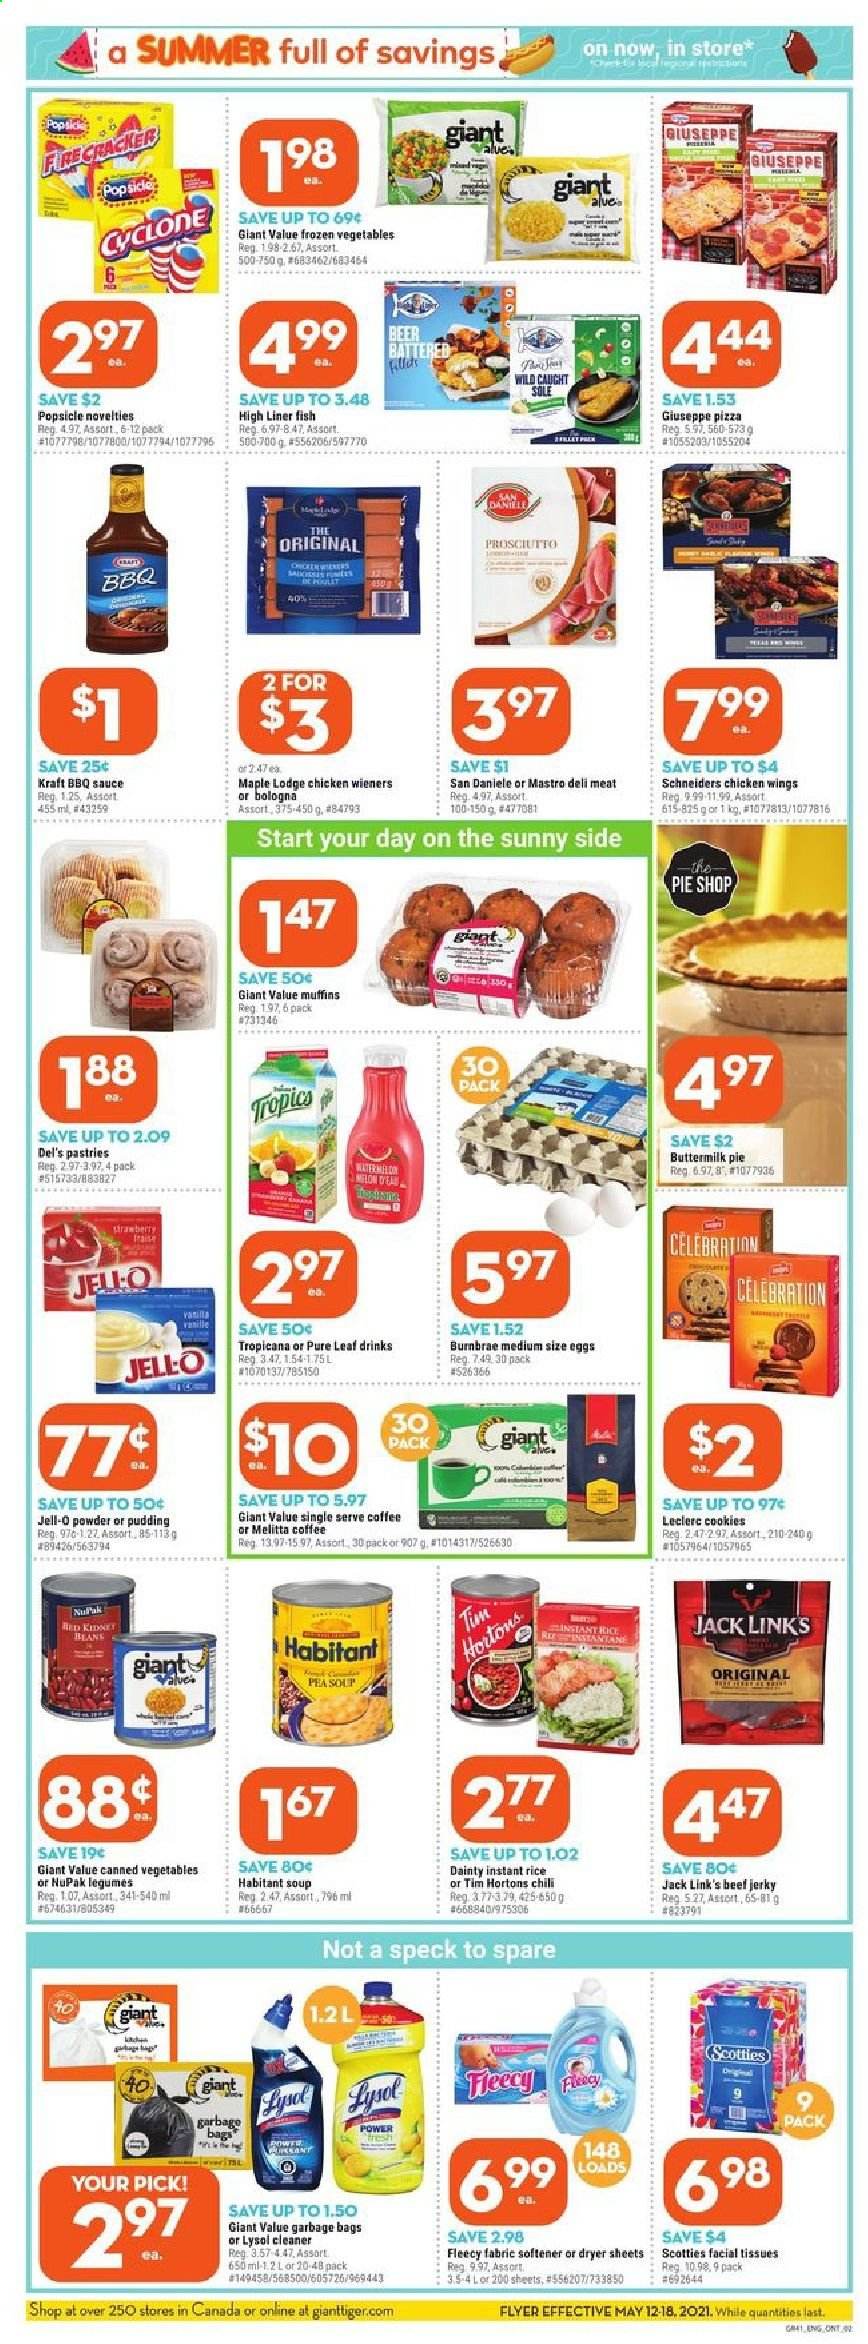 thumbnail - Giant Tiger Flyer - May 12, 2021 - May 18, 2021 - Sales products - muffin, watermelon, fish, pizza, soup, sauce, Kraft®, beef jerky, jerky, prosciutto, bologna sausage, pudding, buttermilk, eggs, frozen vegetables, chicken wings, cookies, Celebration, Jack Link's, Jell-O, canned vegetables, BBQ sauce, Pure Leaf, coffee, L'Or, beer, tissues, cleaner, fabric softener, dryer sheets, facial tissues, bag. Page 2.